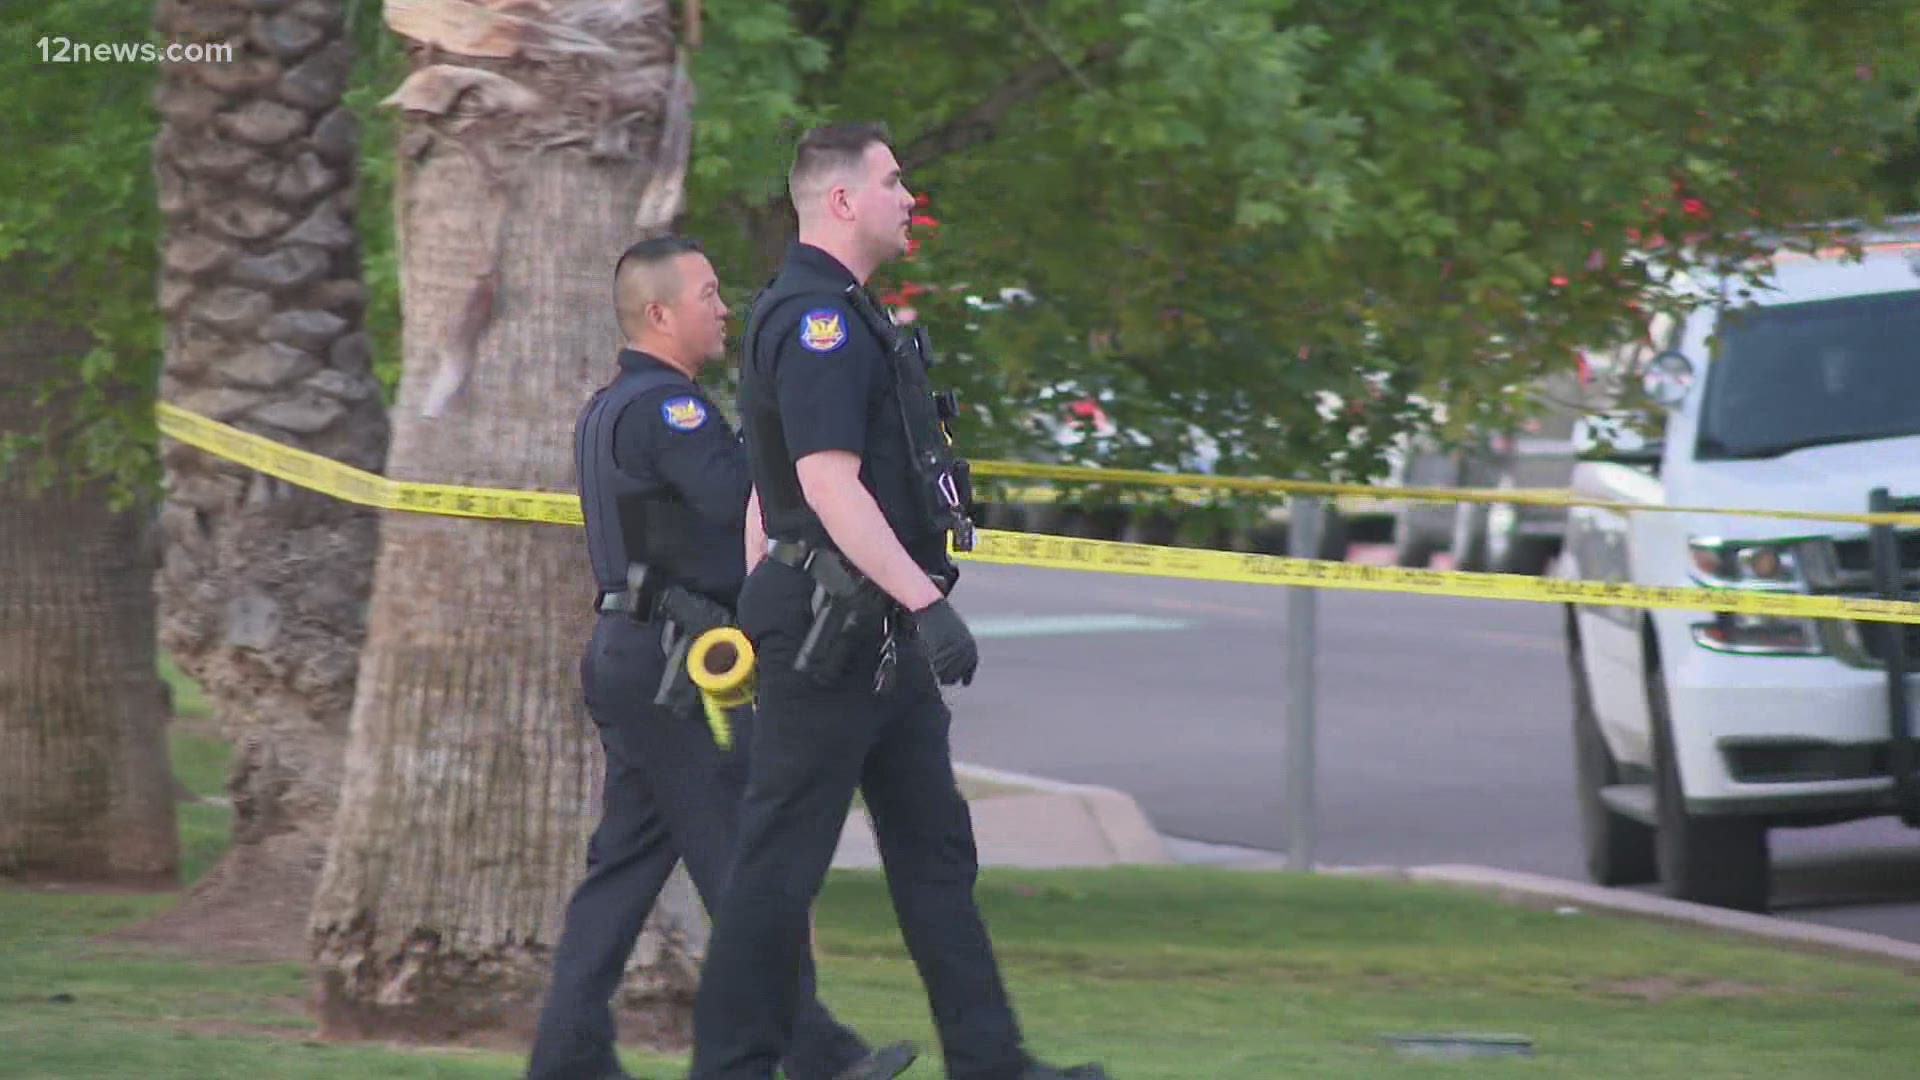 Phoenix police developed probable cause to arrest 18-year-old Kennon Grover in connection with a homicide that happened in April 2020.